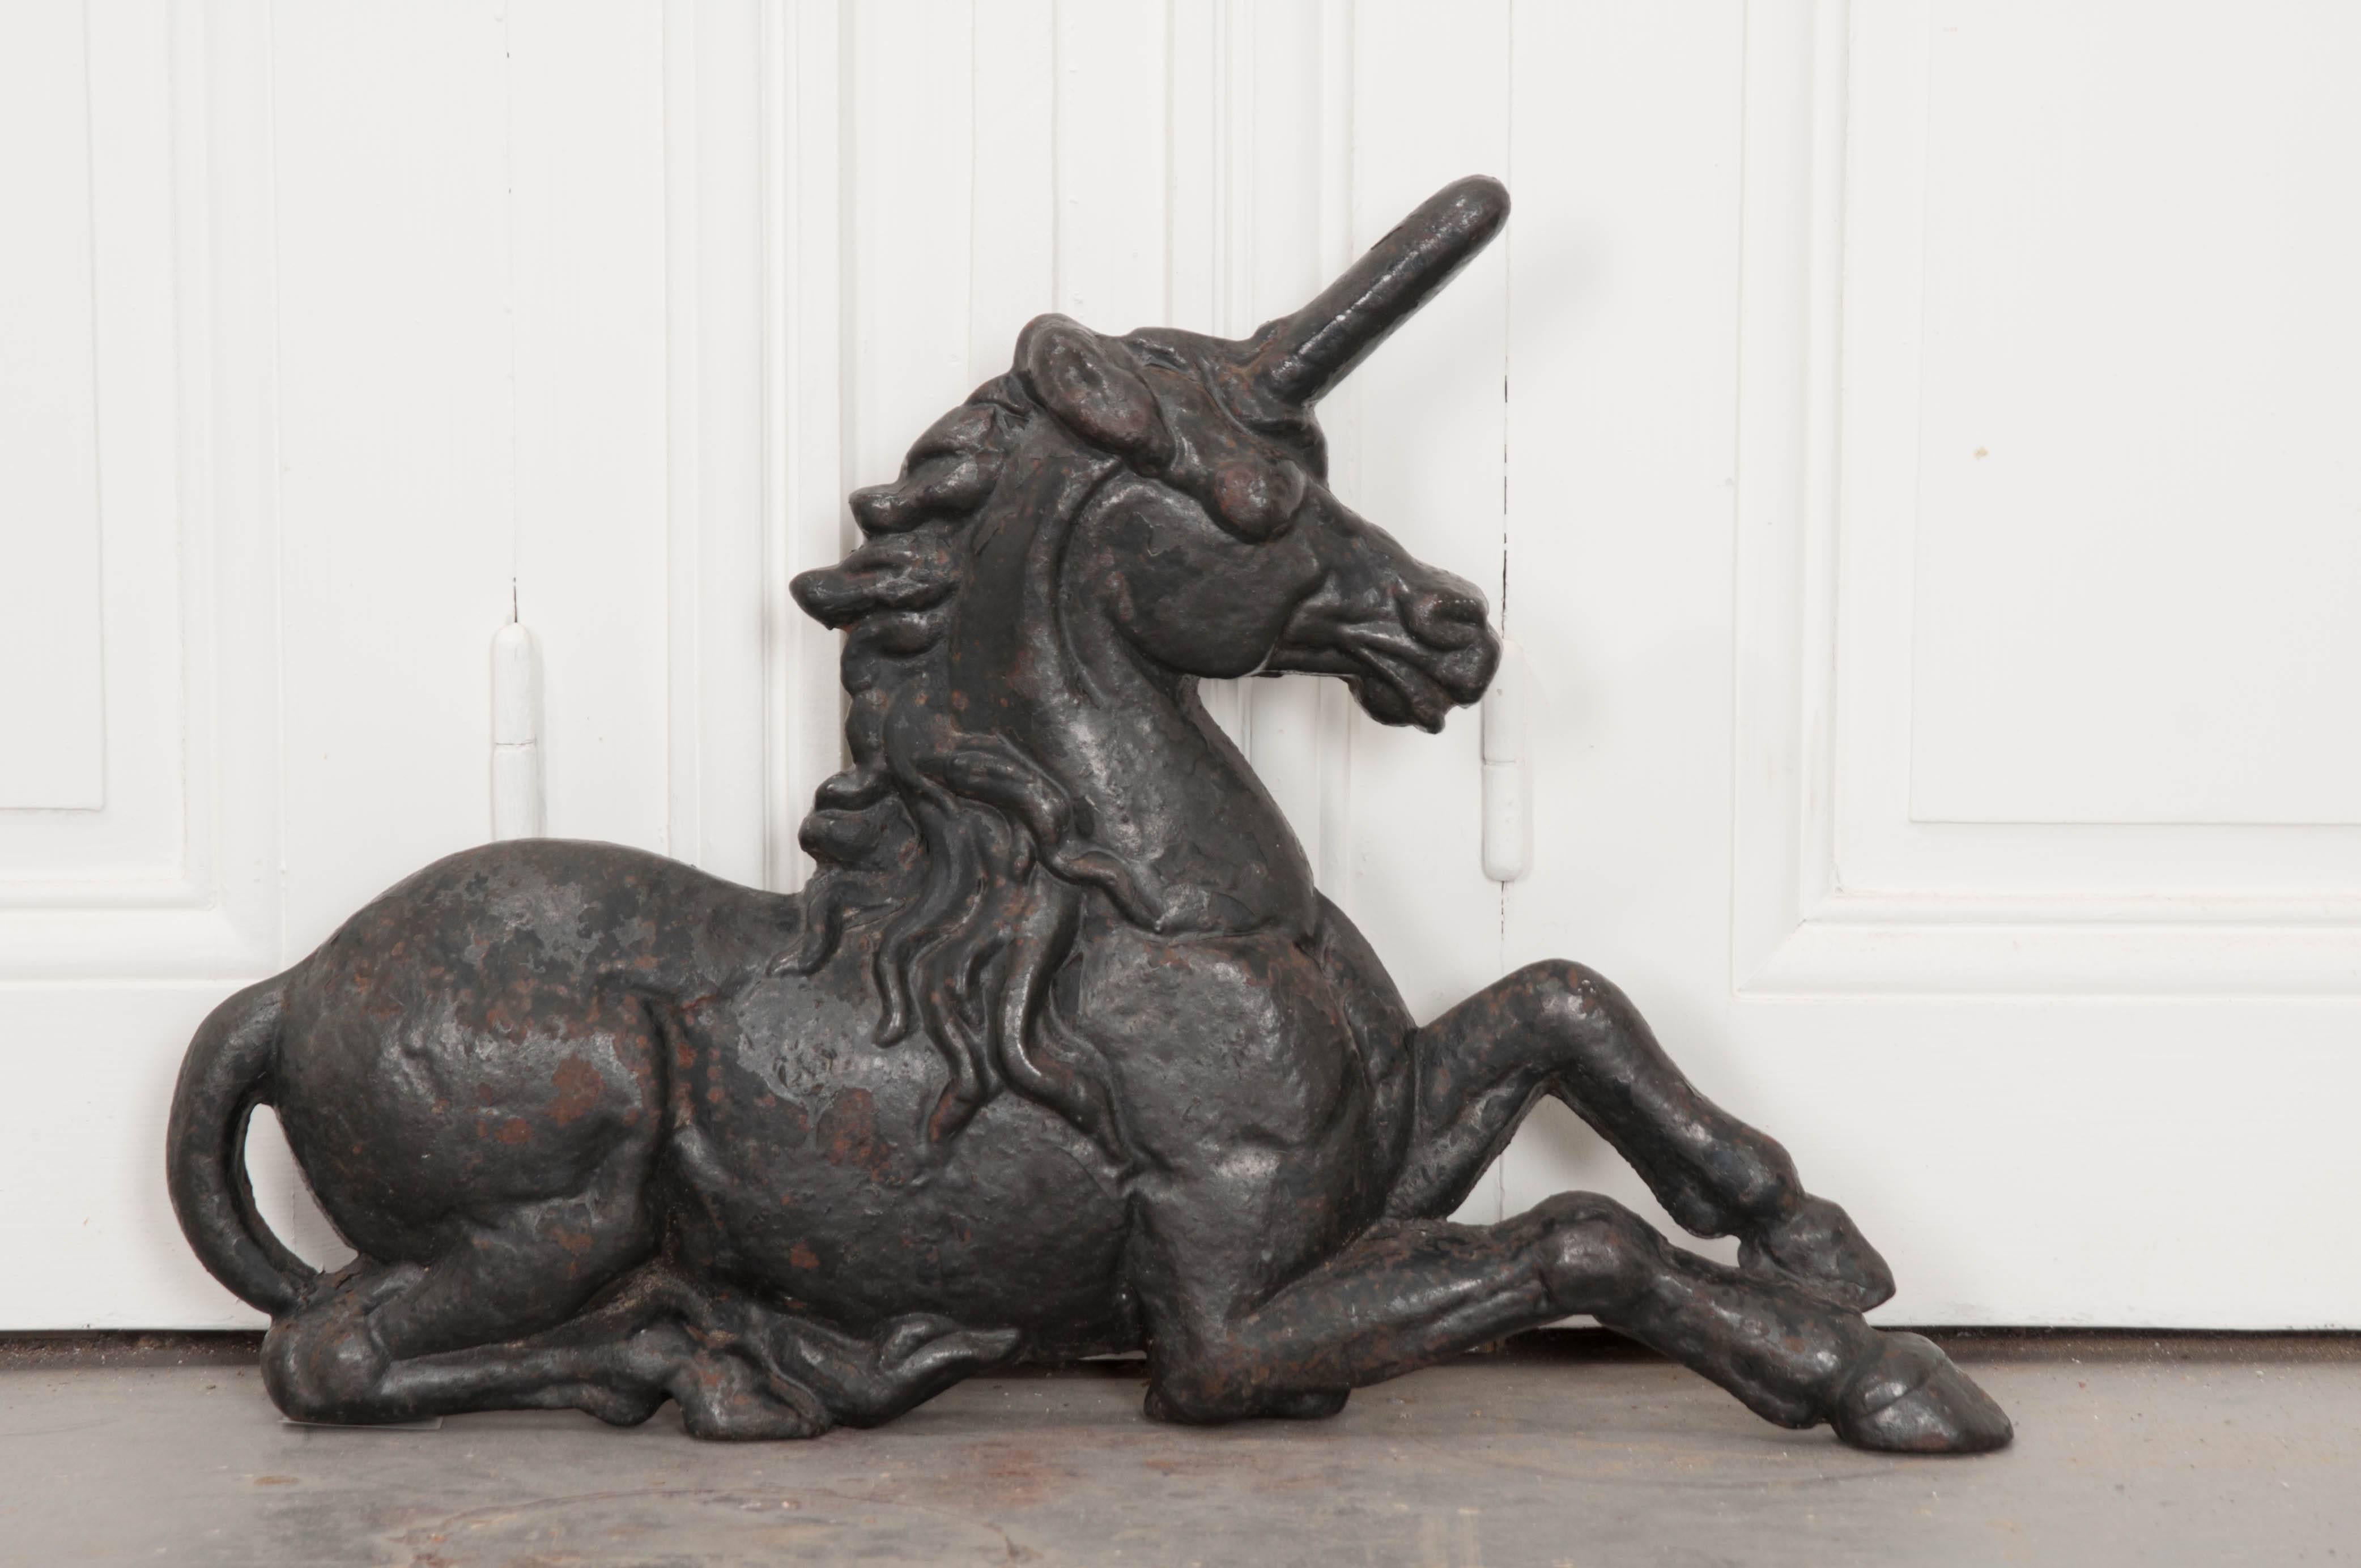 A large, cast iron unicorn, from 19th century England. Unicorns are a common motif used in British and Scottish works. A free unicorn, according to legend, is considered to be a wild and dangerous creature. This unicorn is tame, harmless and eager